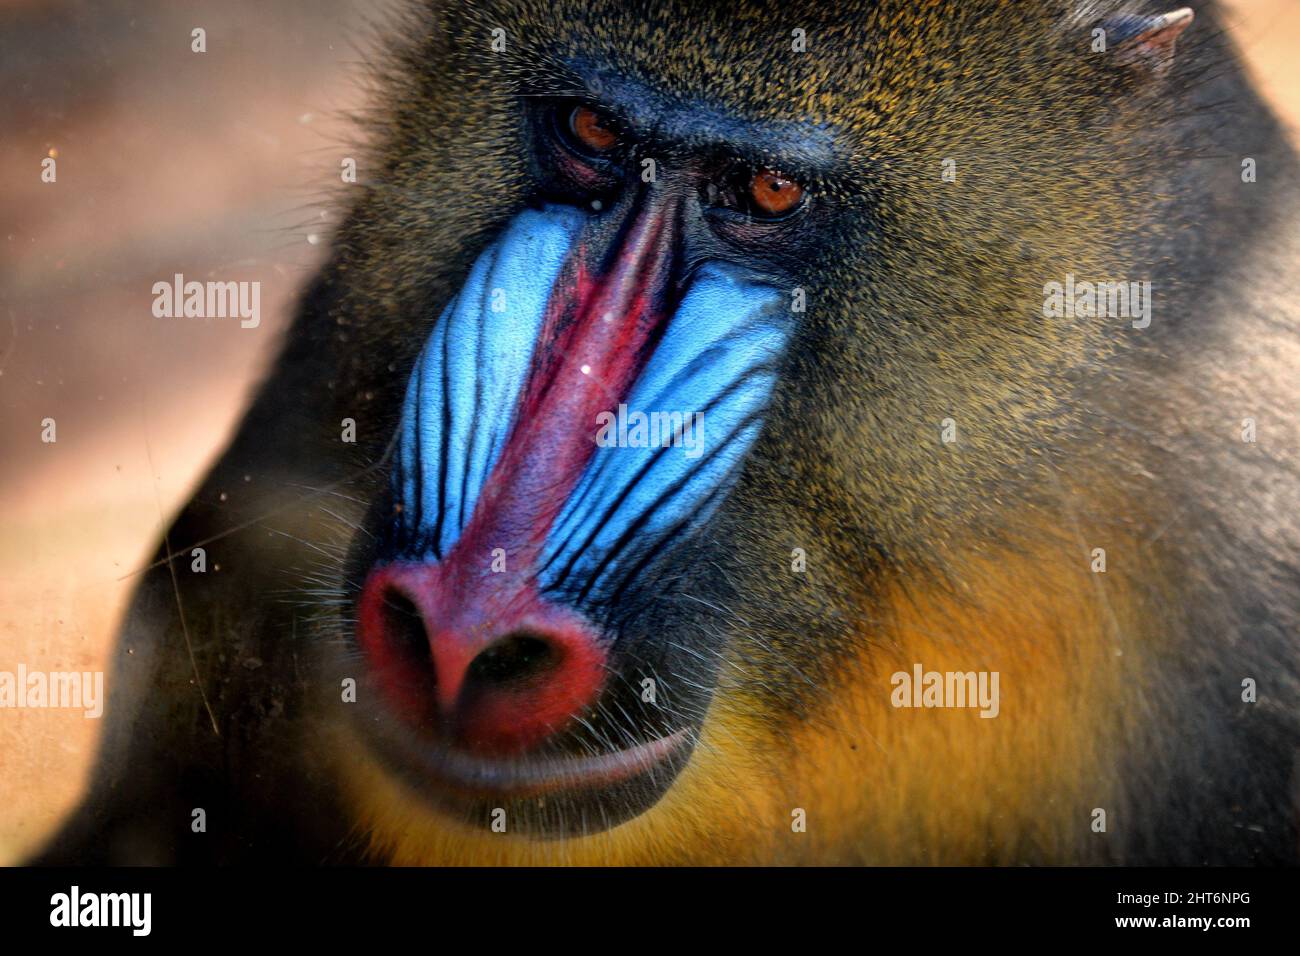 red and blue faced monkey